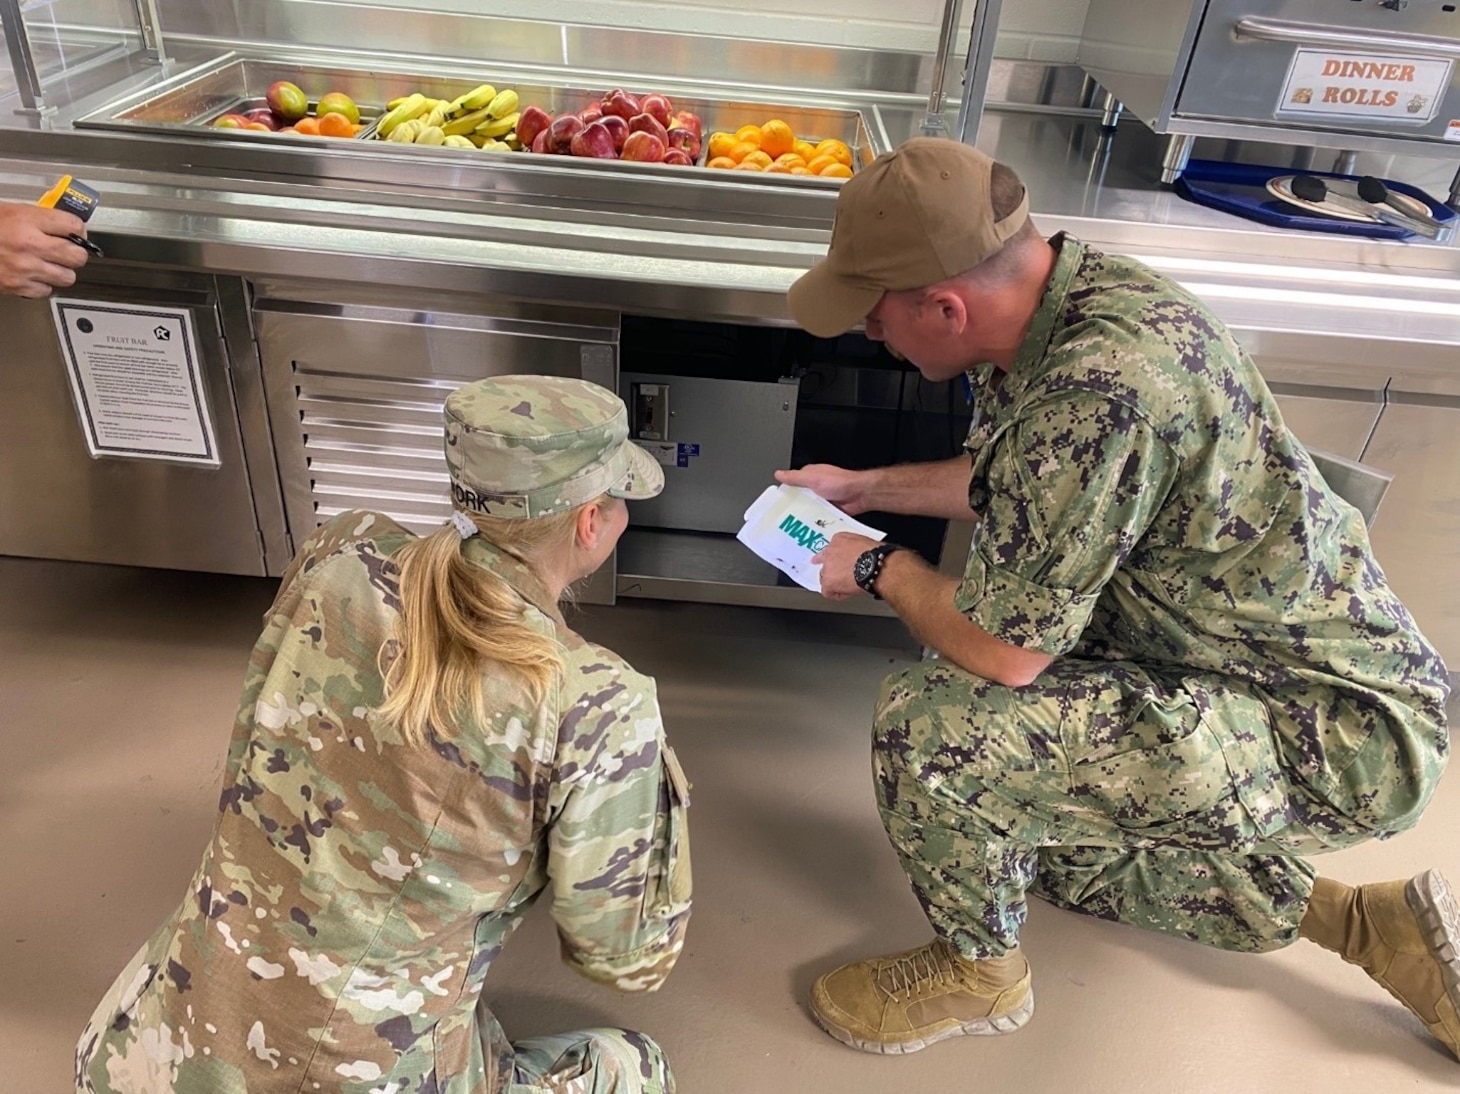 Navy Lt. Thomas McGlynn, of Navy Entomology Center of Excellence, trains Army Capt. Melissa Work, of Army Public Health Command East, and her team on insect surveillance at Naval Station Guantanamo Bay, January 17, 2024, providing mission critical entomological training and to search for the presence of Ae. vittatus, a newly introduced mosquito species and possible carrier of Yellow Fever. (U.S. Navy photo by James Butler, CIV)